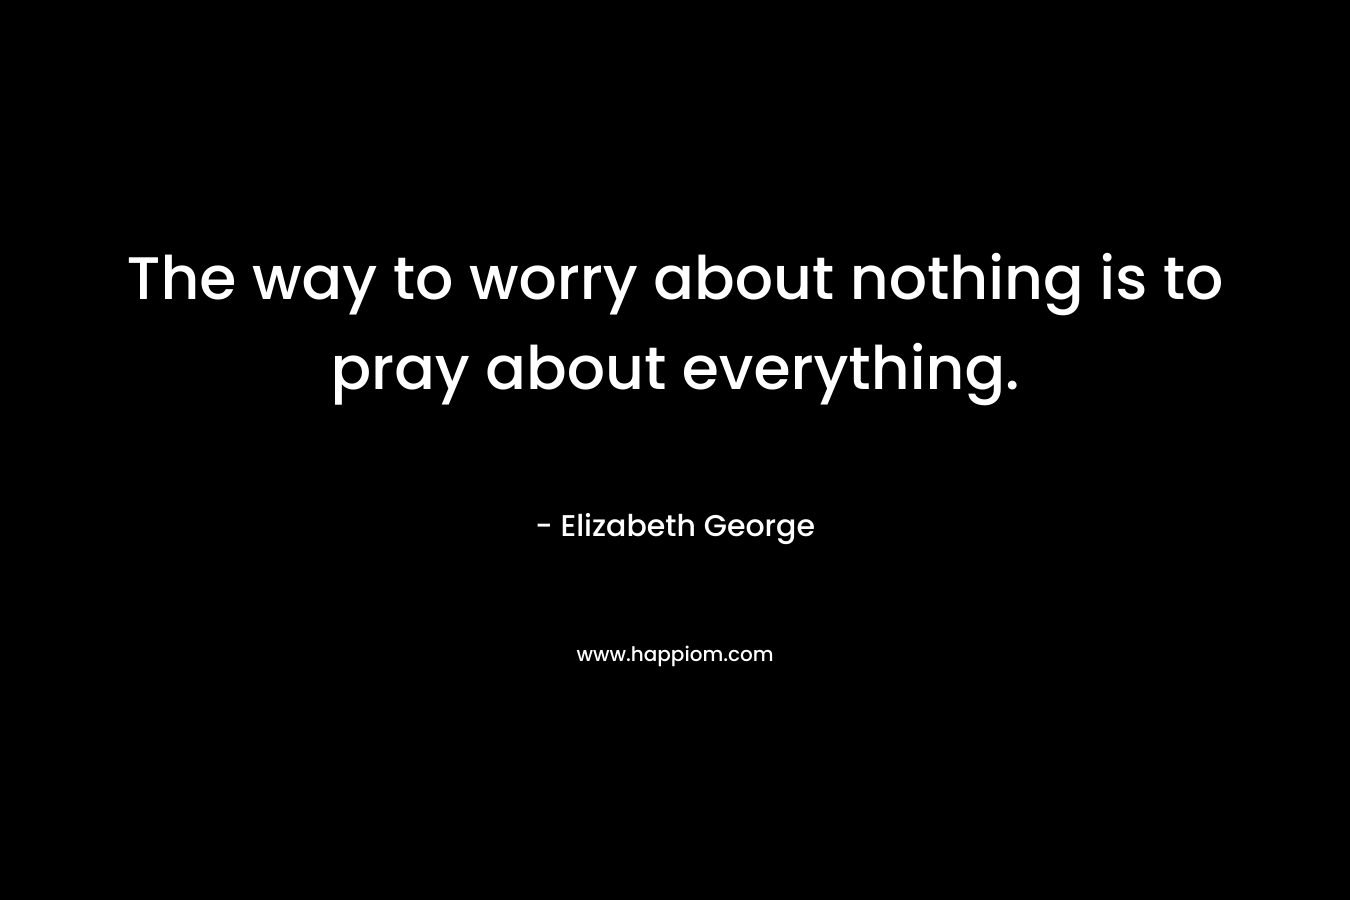 The way to worry about nothing is to pray about everything.